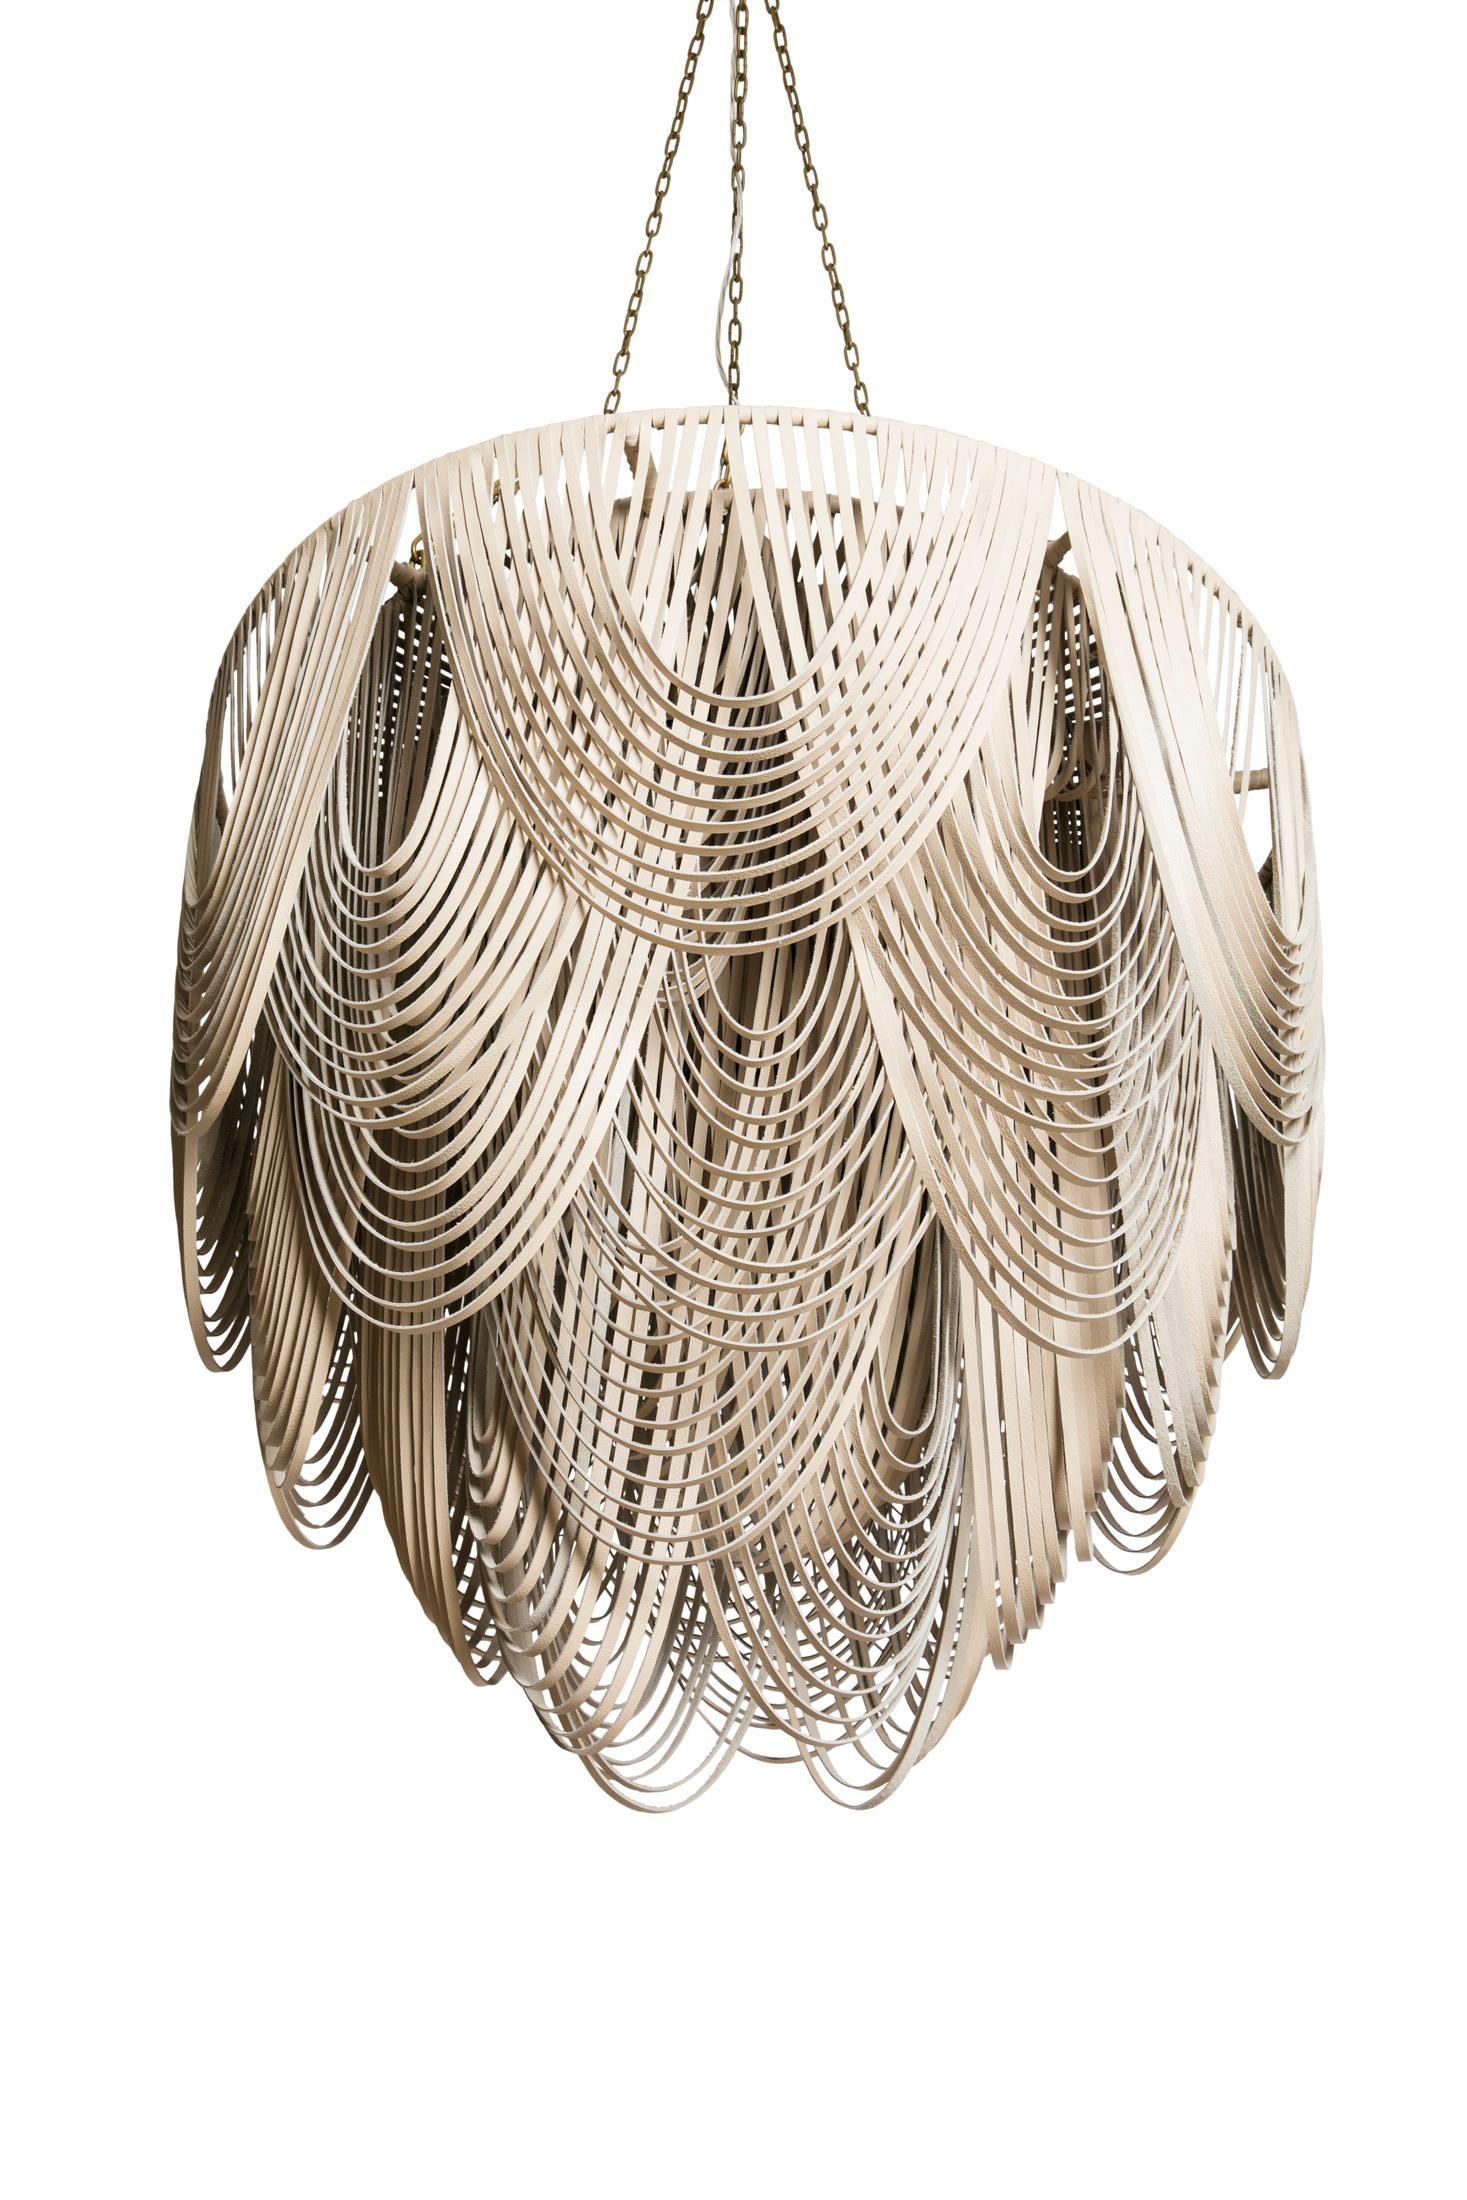 Perhaps the most unexpected textile for a light fixture, the leather Whisper Chandelier is handcrafted with swags of leather layered in graceful arcs for a stunning-yet- natural look. The ambient light from within the fixture provides a soft